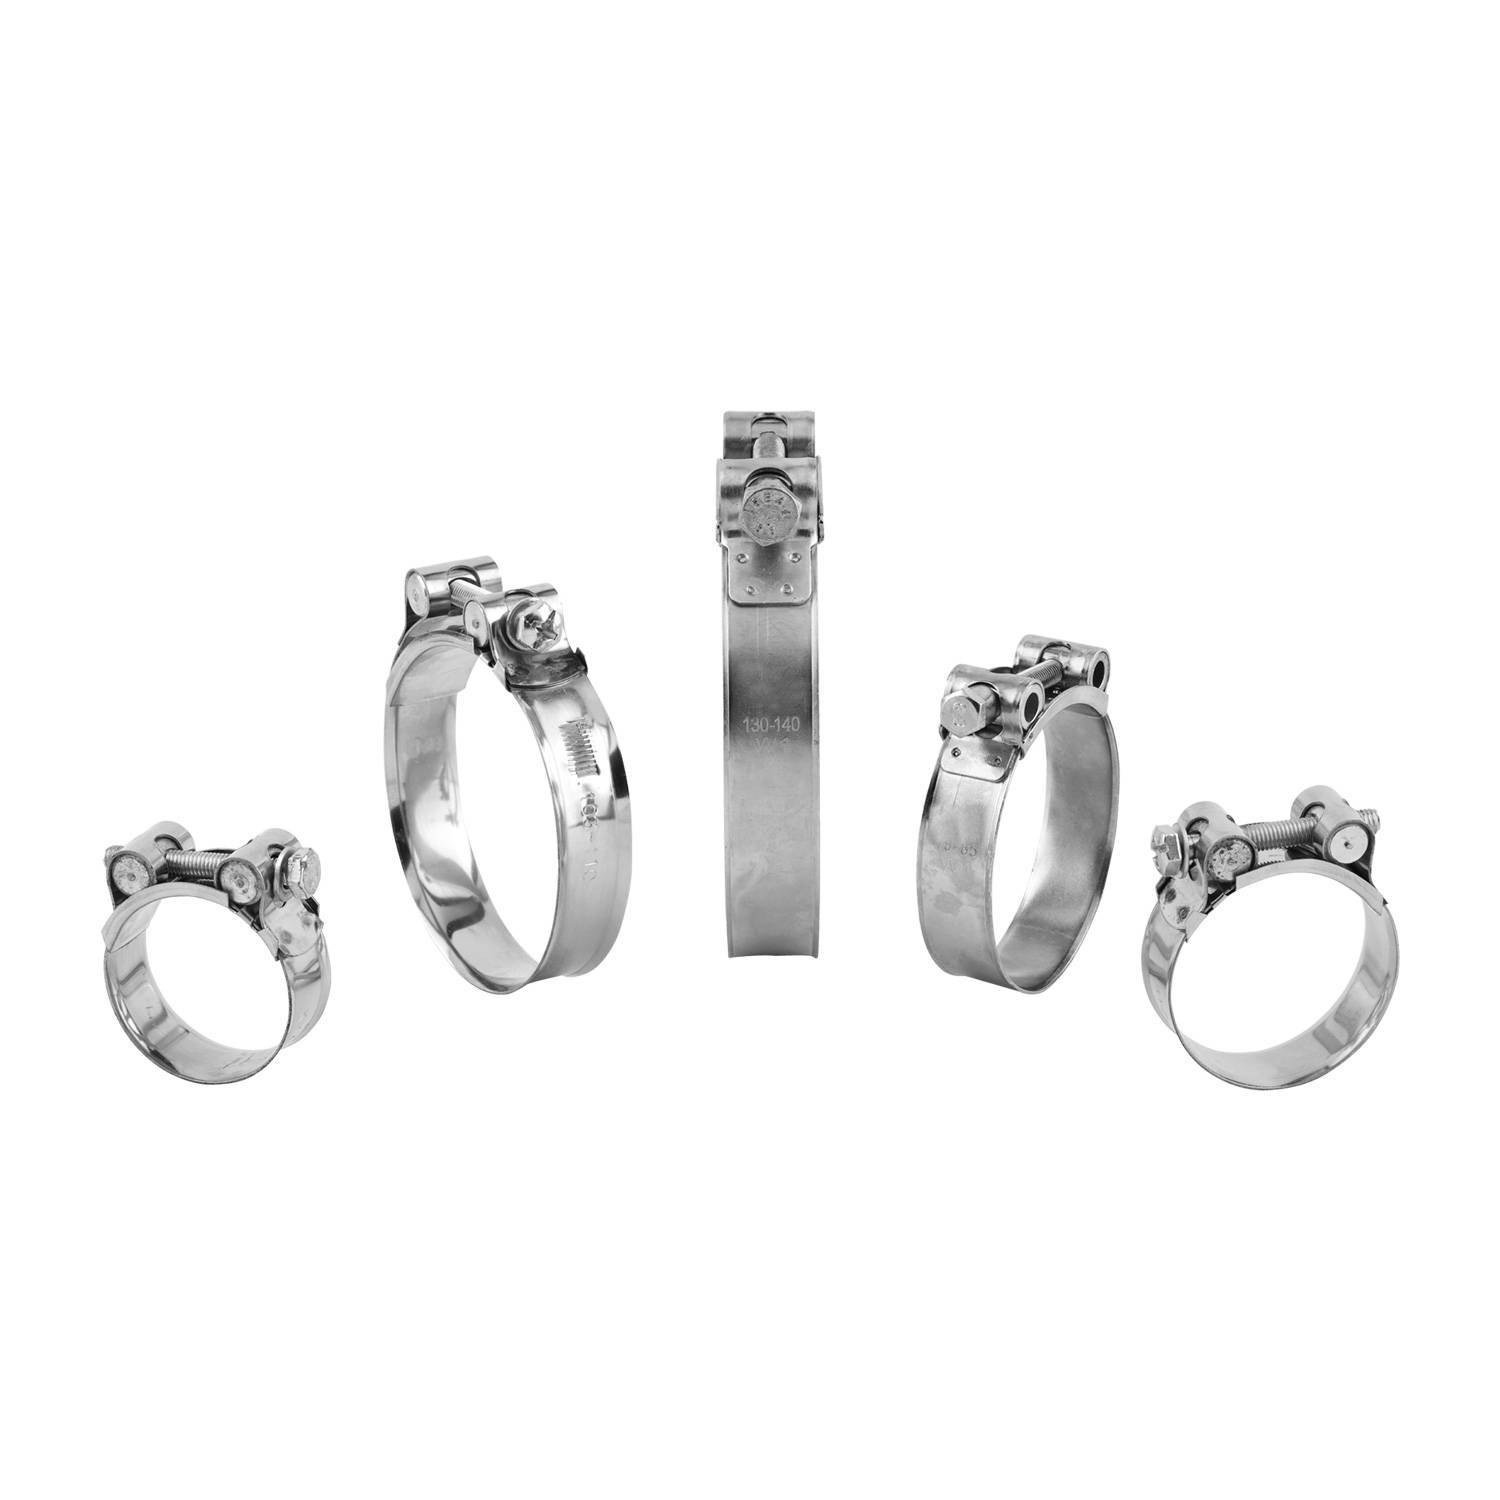 14 MM RIBBED CLAMP